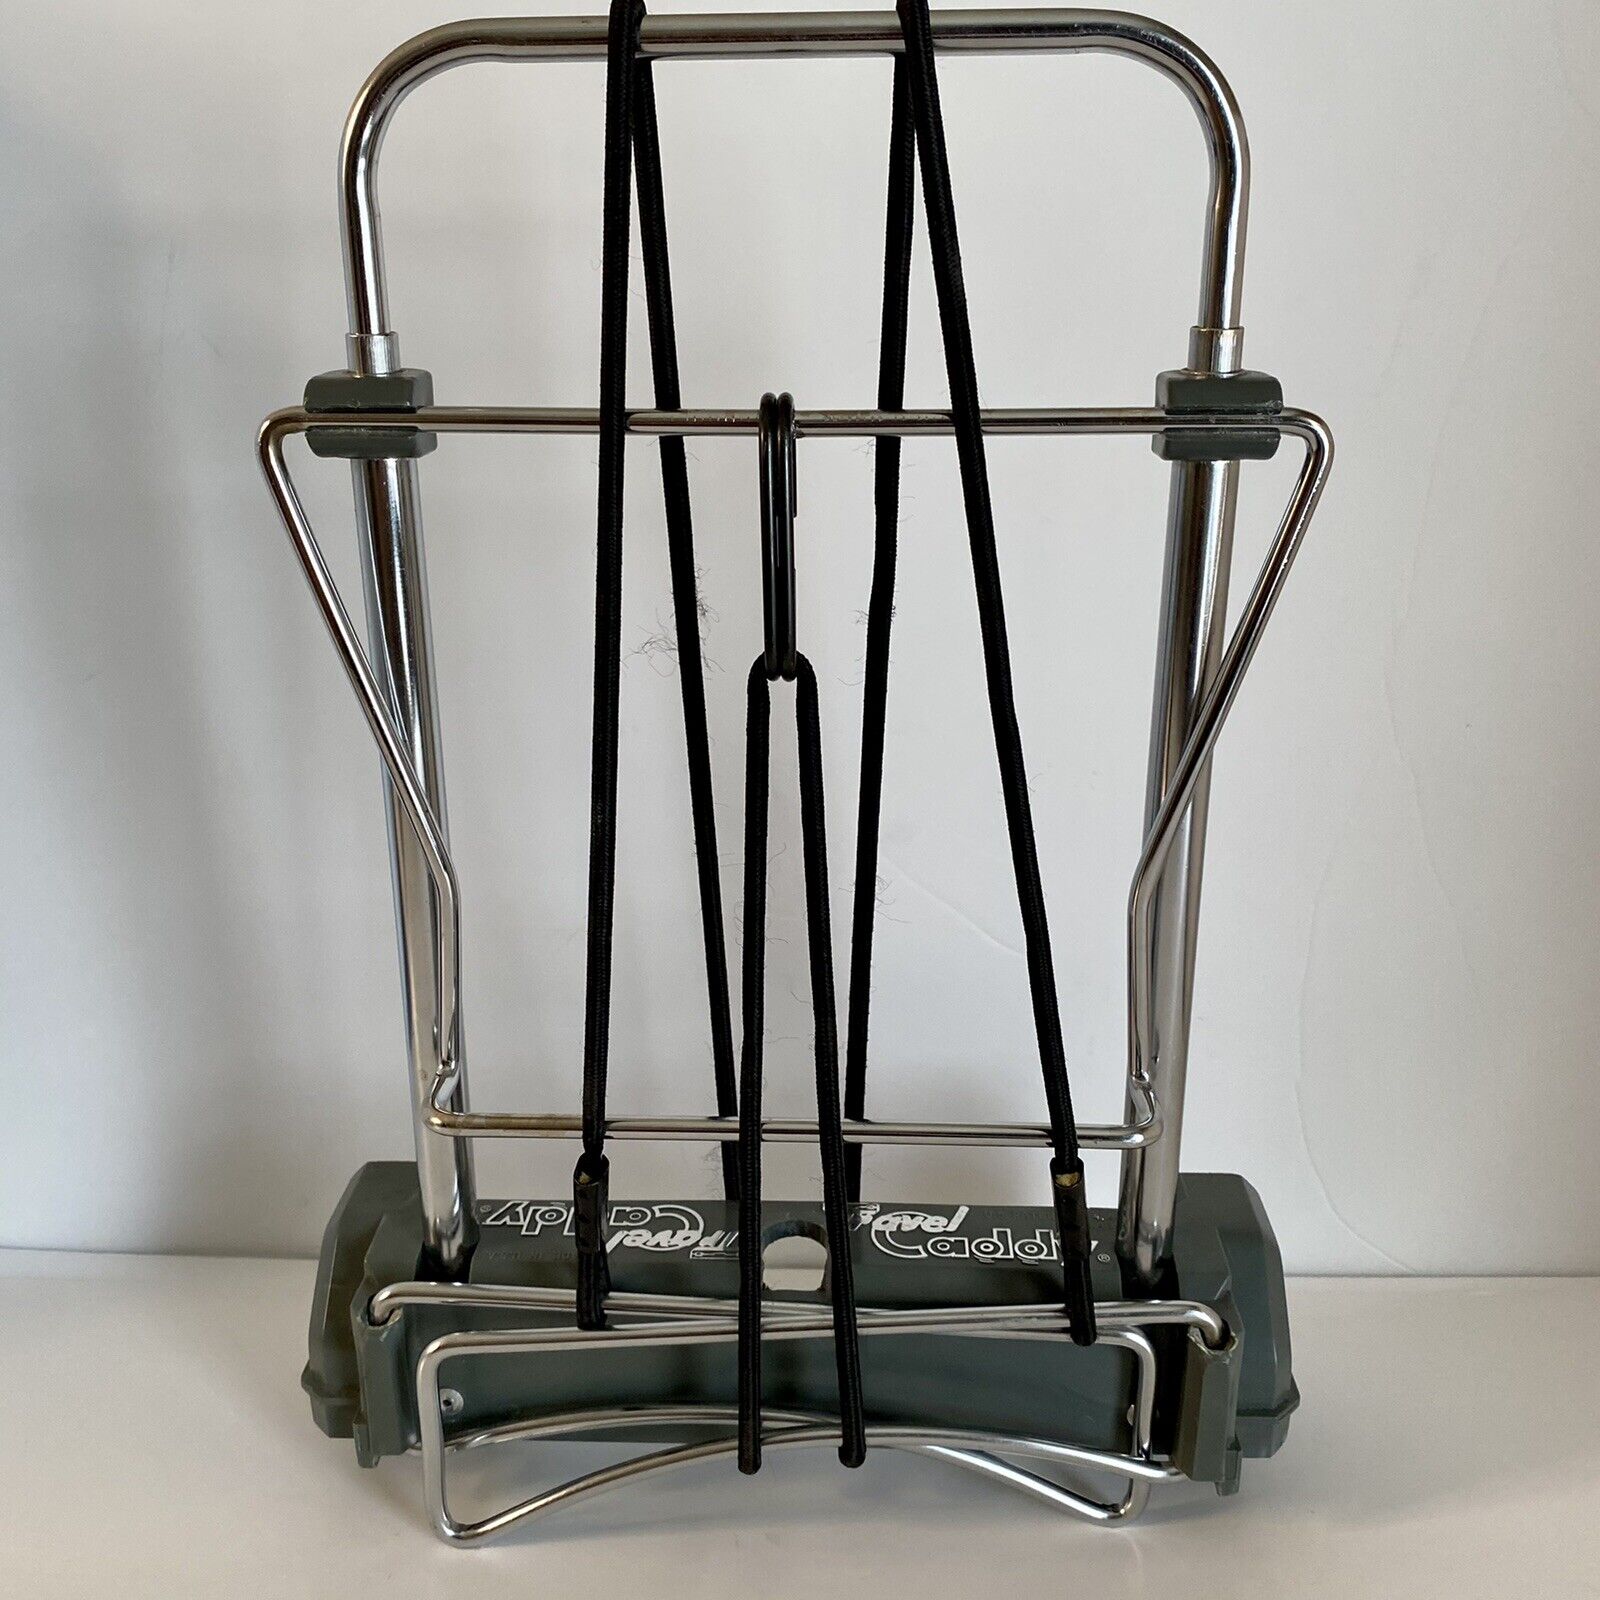 Vintage Travel Caddy Luggage Hand Cart Collapsible Mid Century Modern